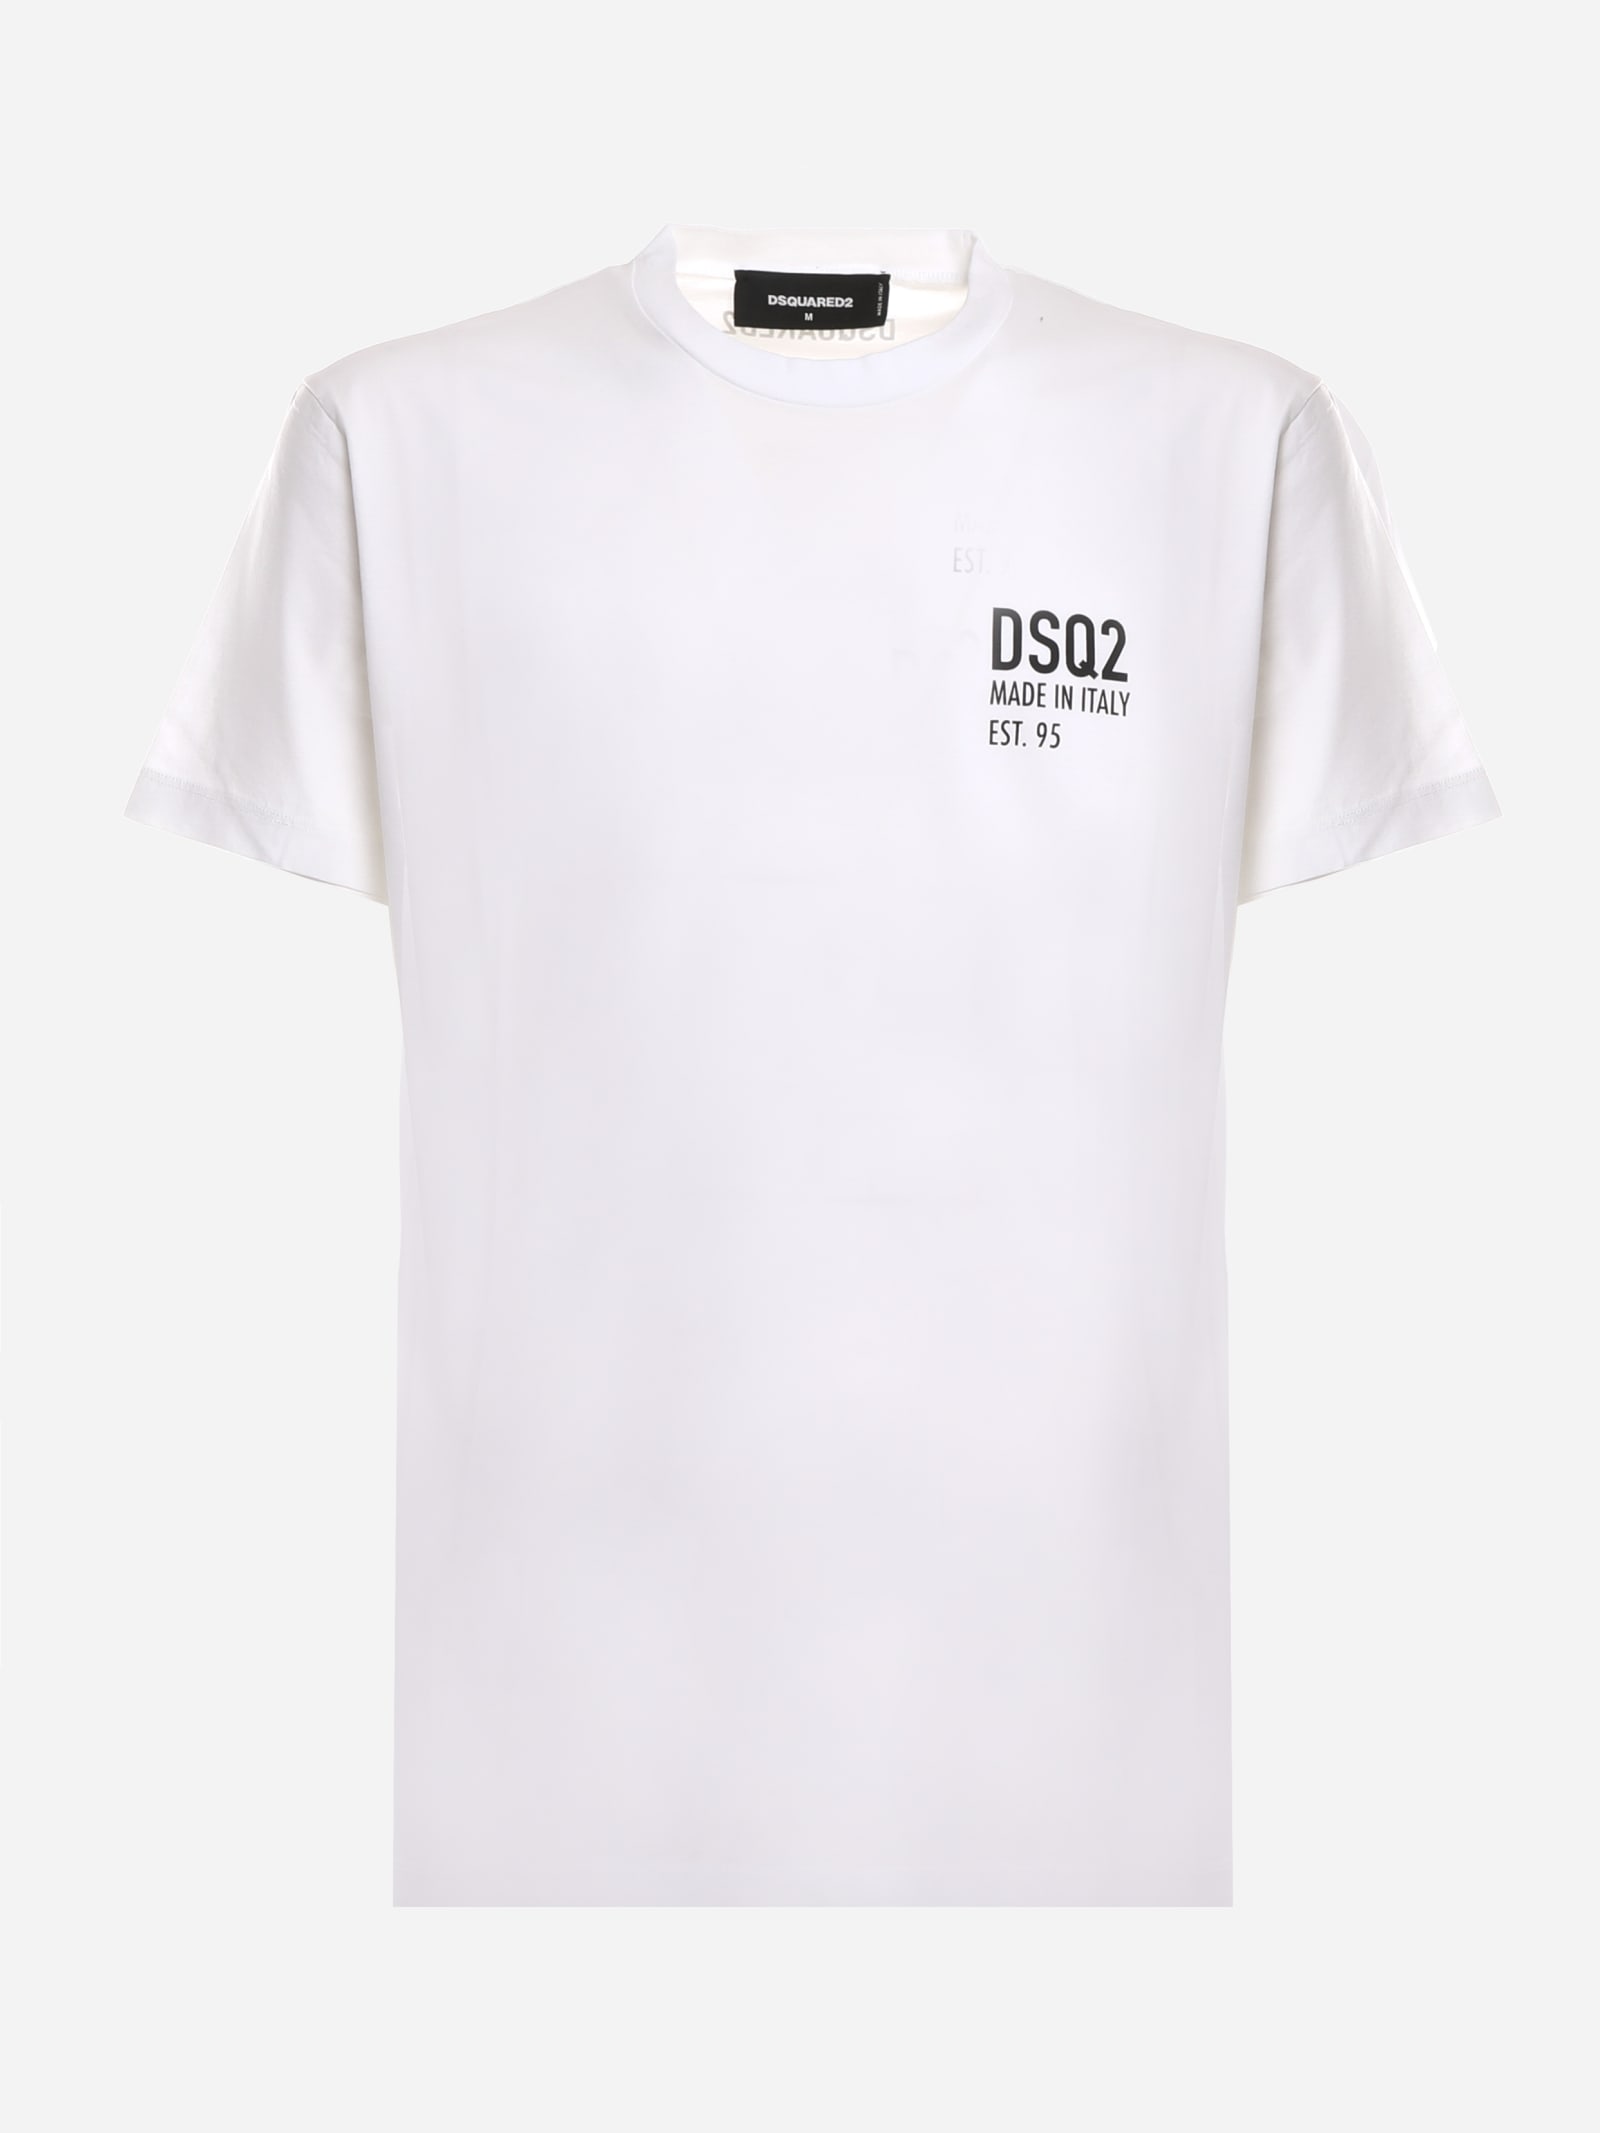 DSQUARED2 COTTON T-SHIRT WITH LOGO,S71GD1018 S23009100